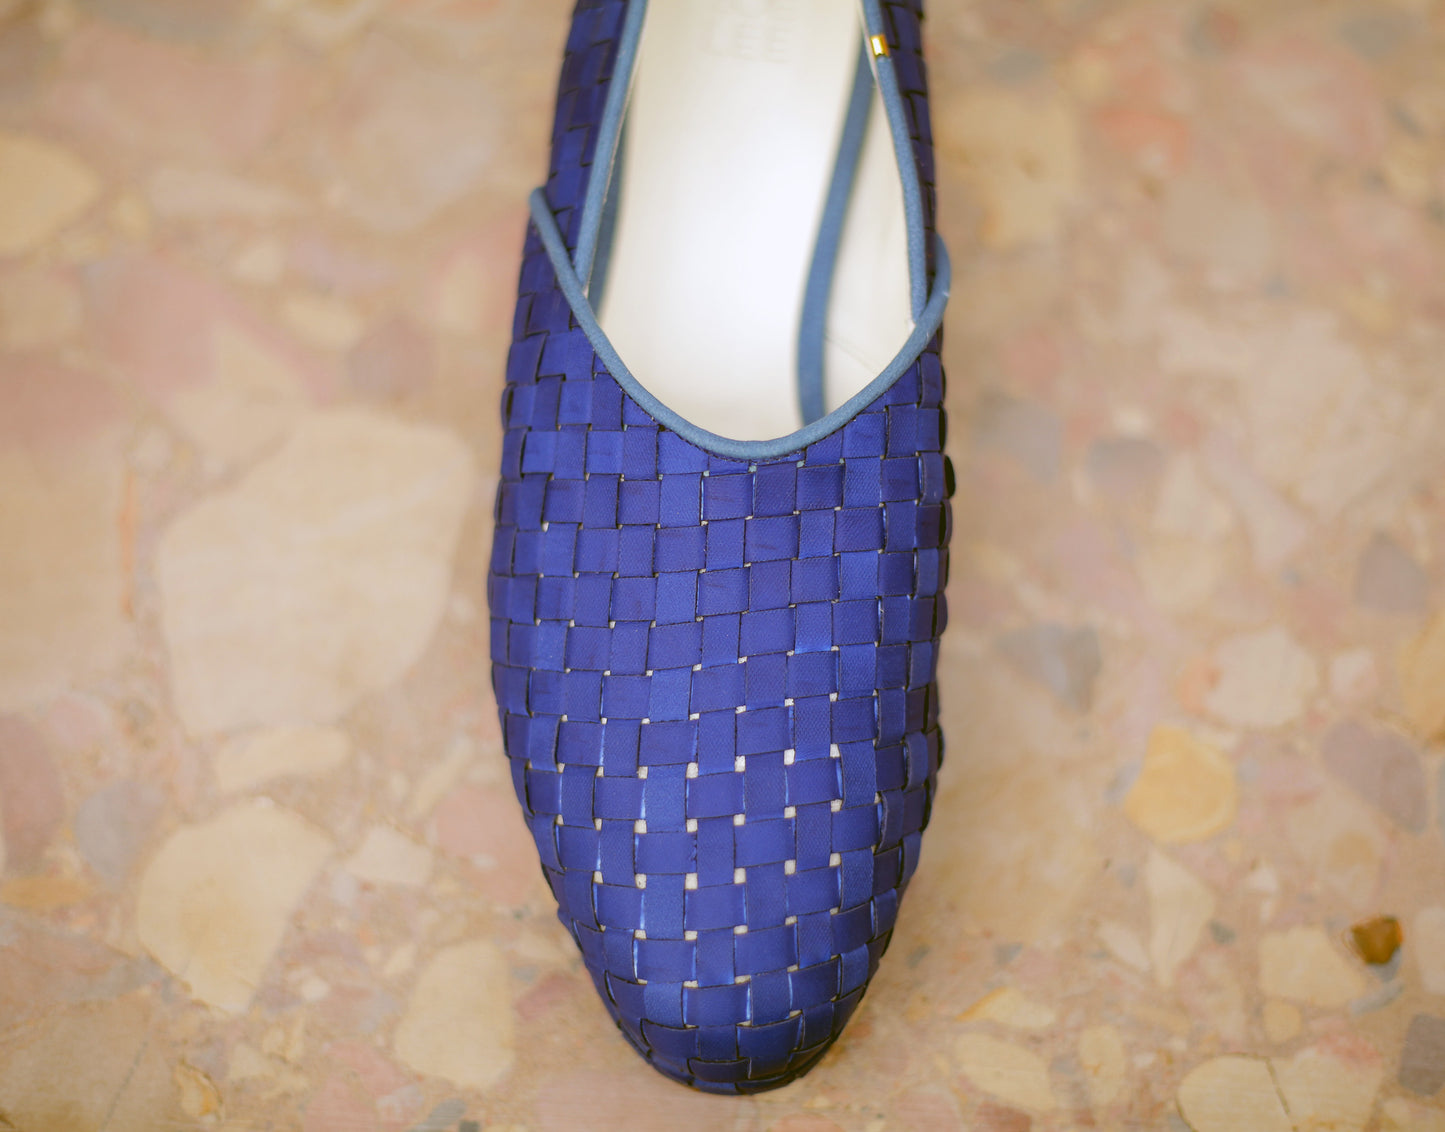 The Beaux in Woven Blue